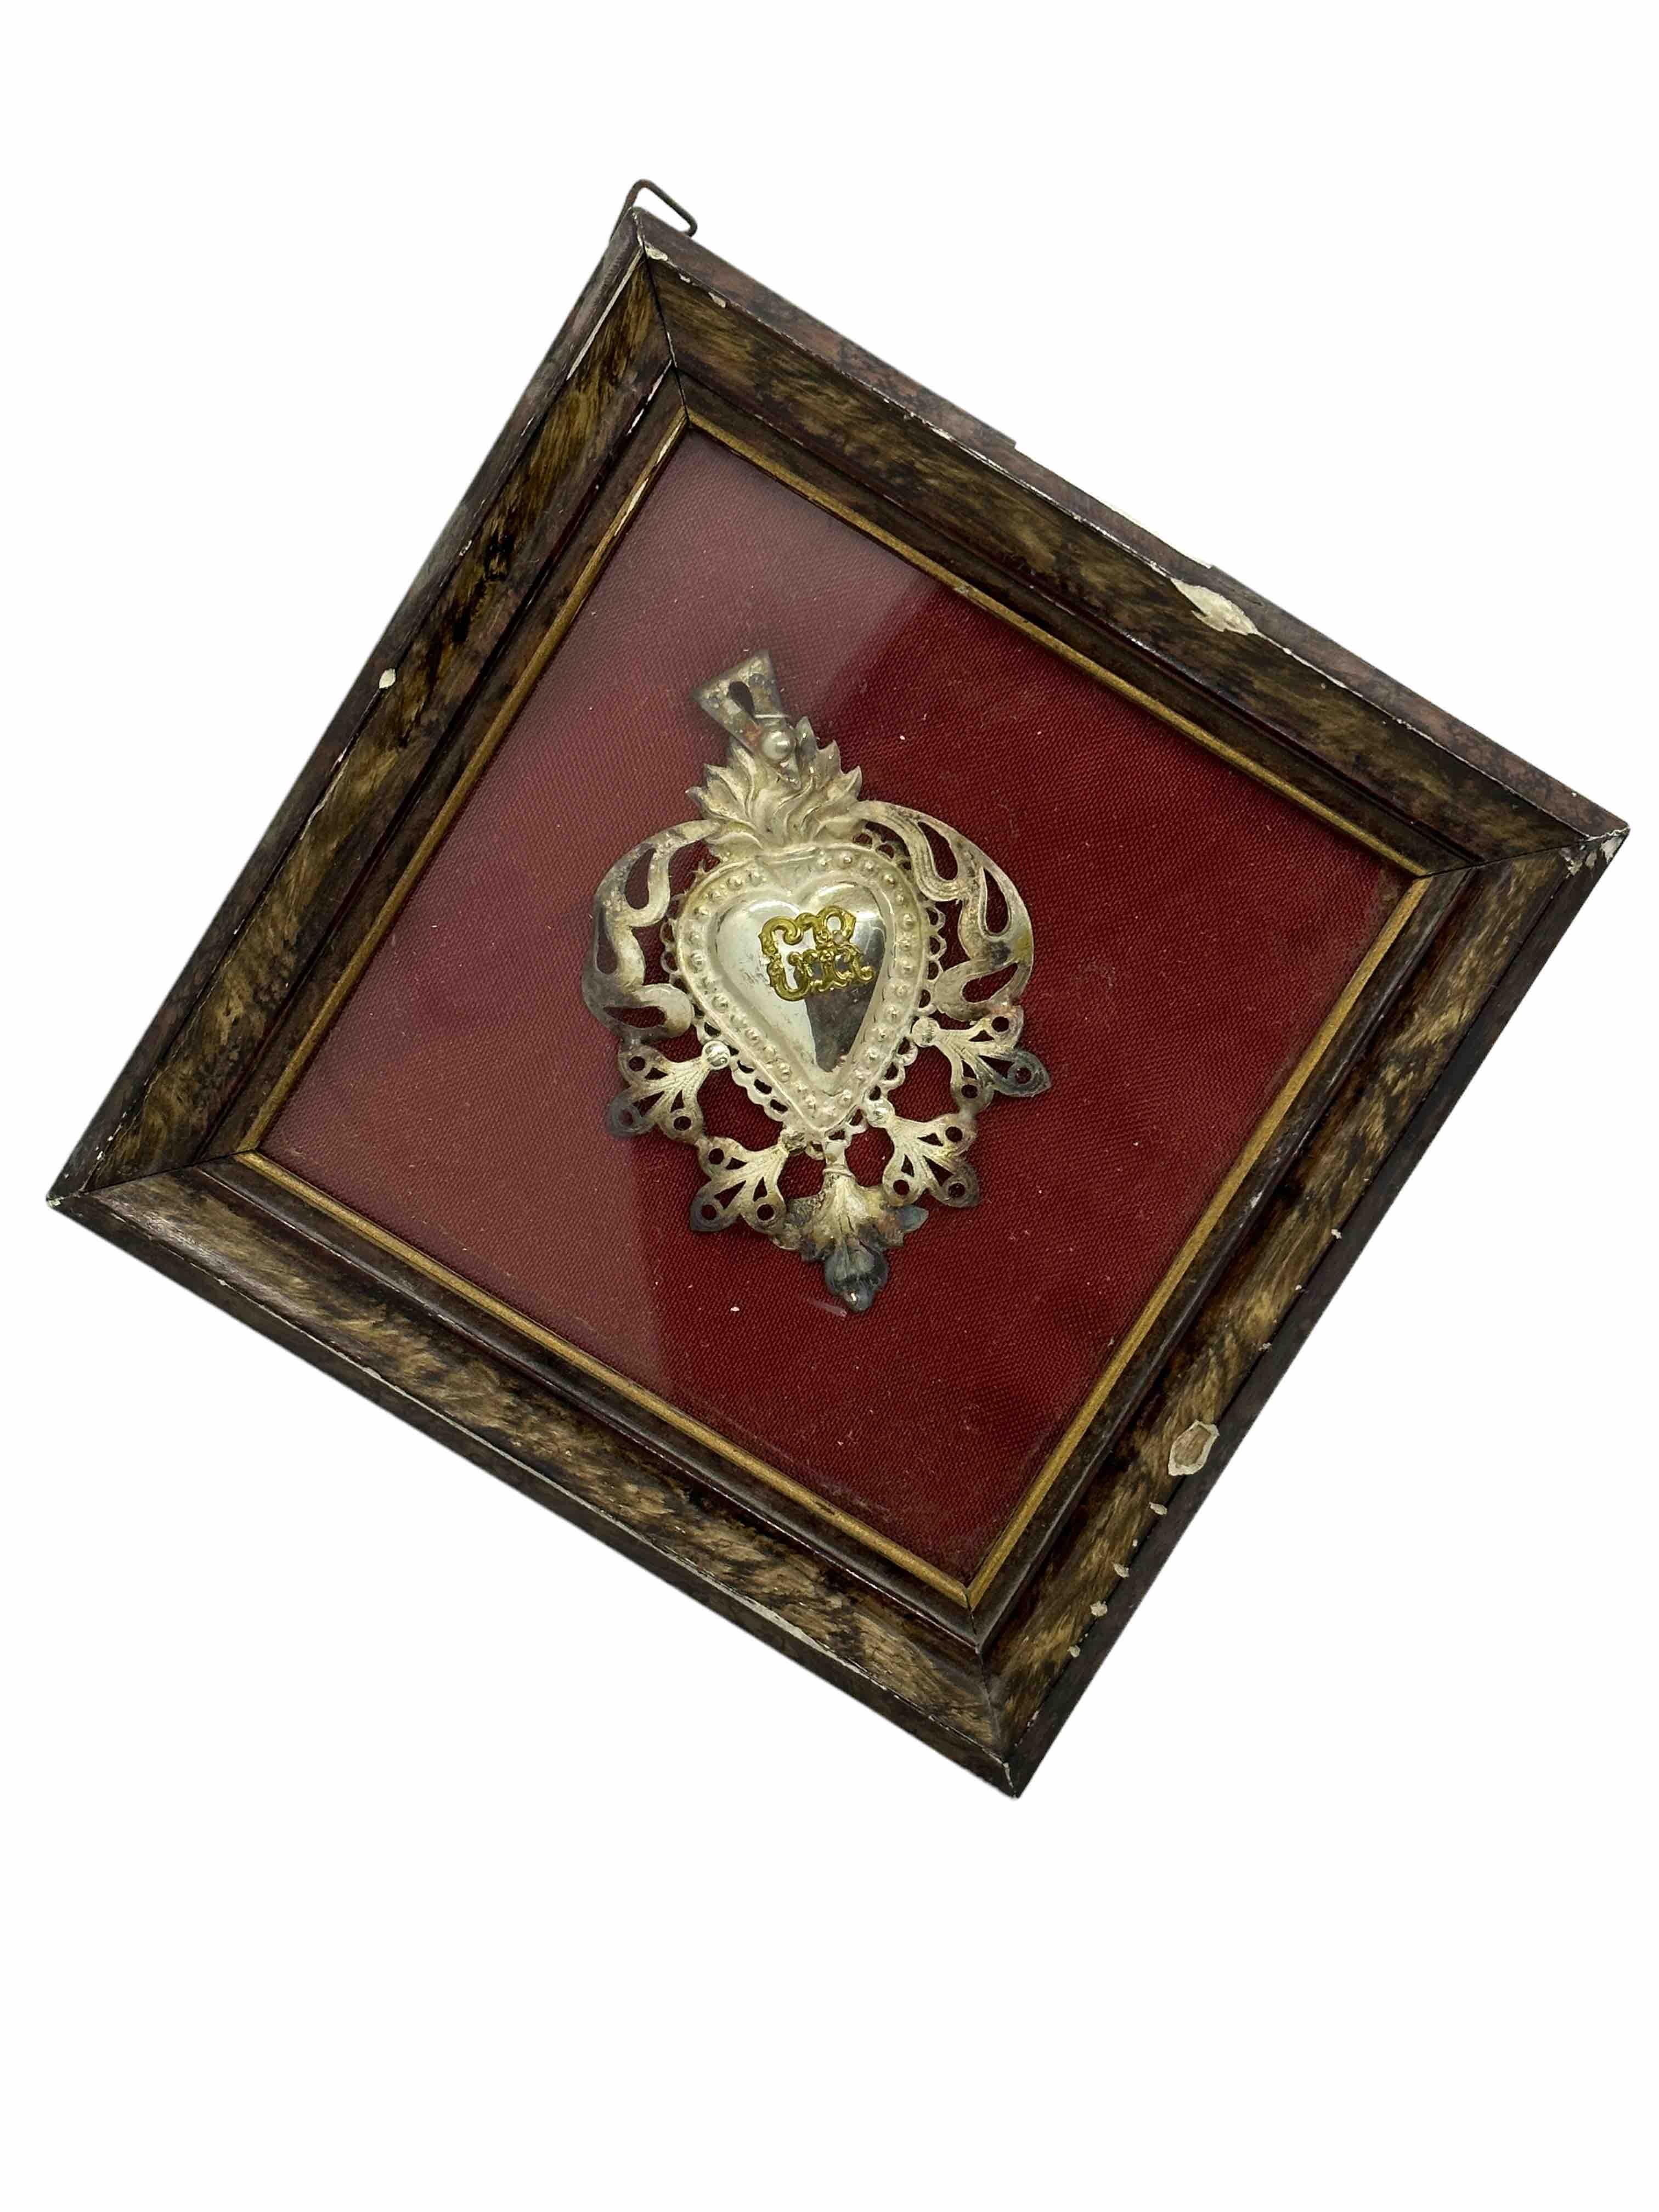 A cute petite religious Ex Voto in a nice frame. I do not know what it is made of, thin and light filigree silver or silver plated metal. It is handmade, embossed and then welded. Given the delicacy, I did not try to remove the tarnish and I think